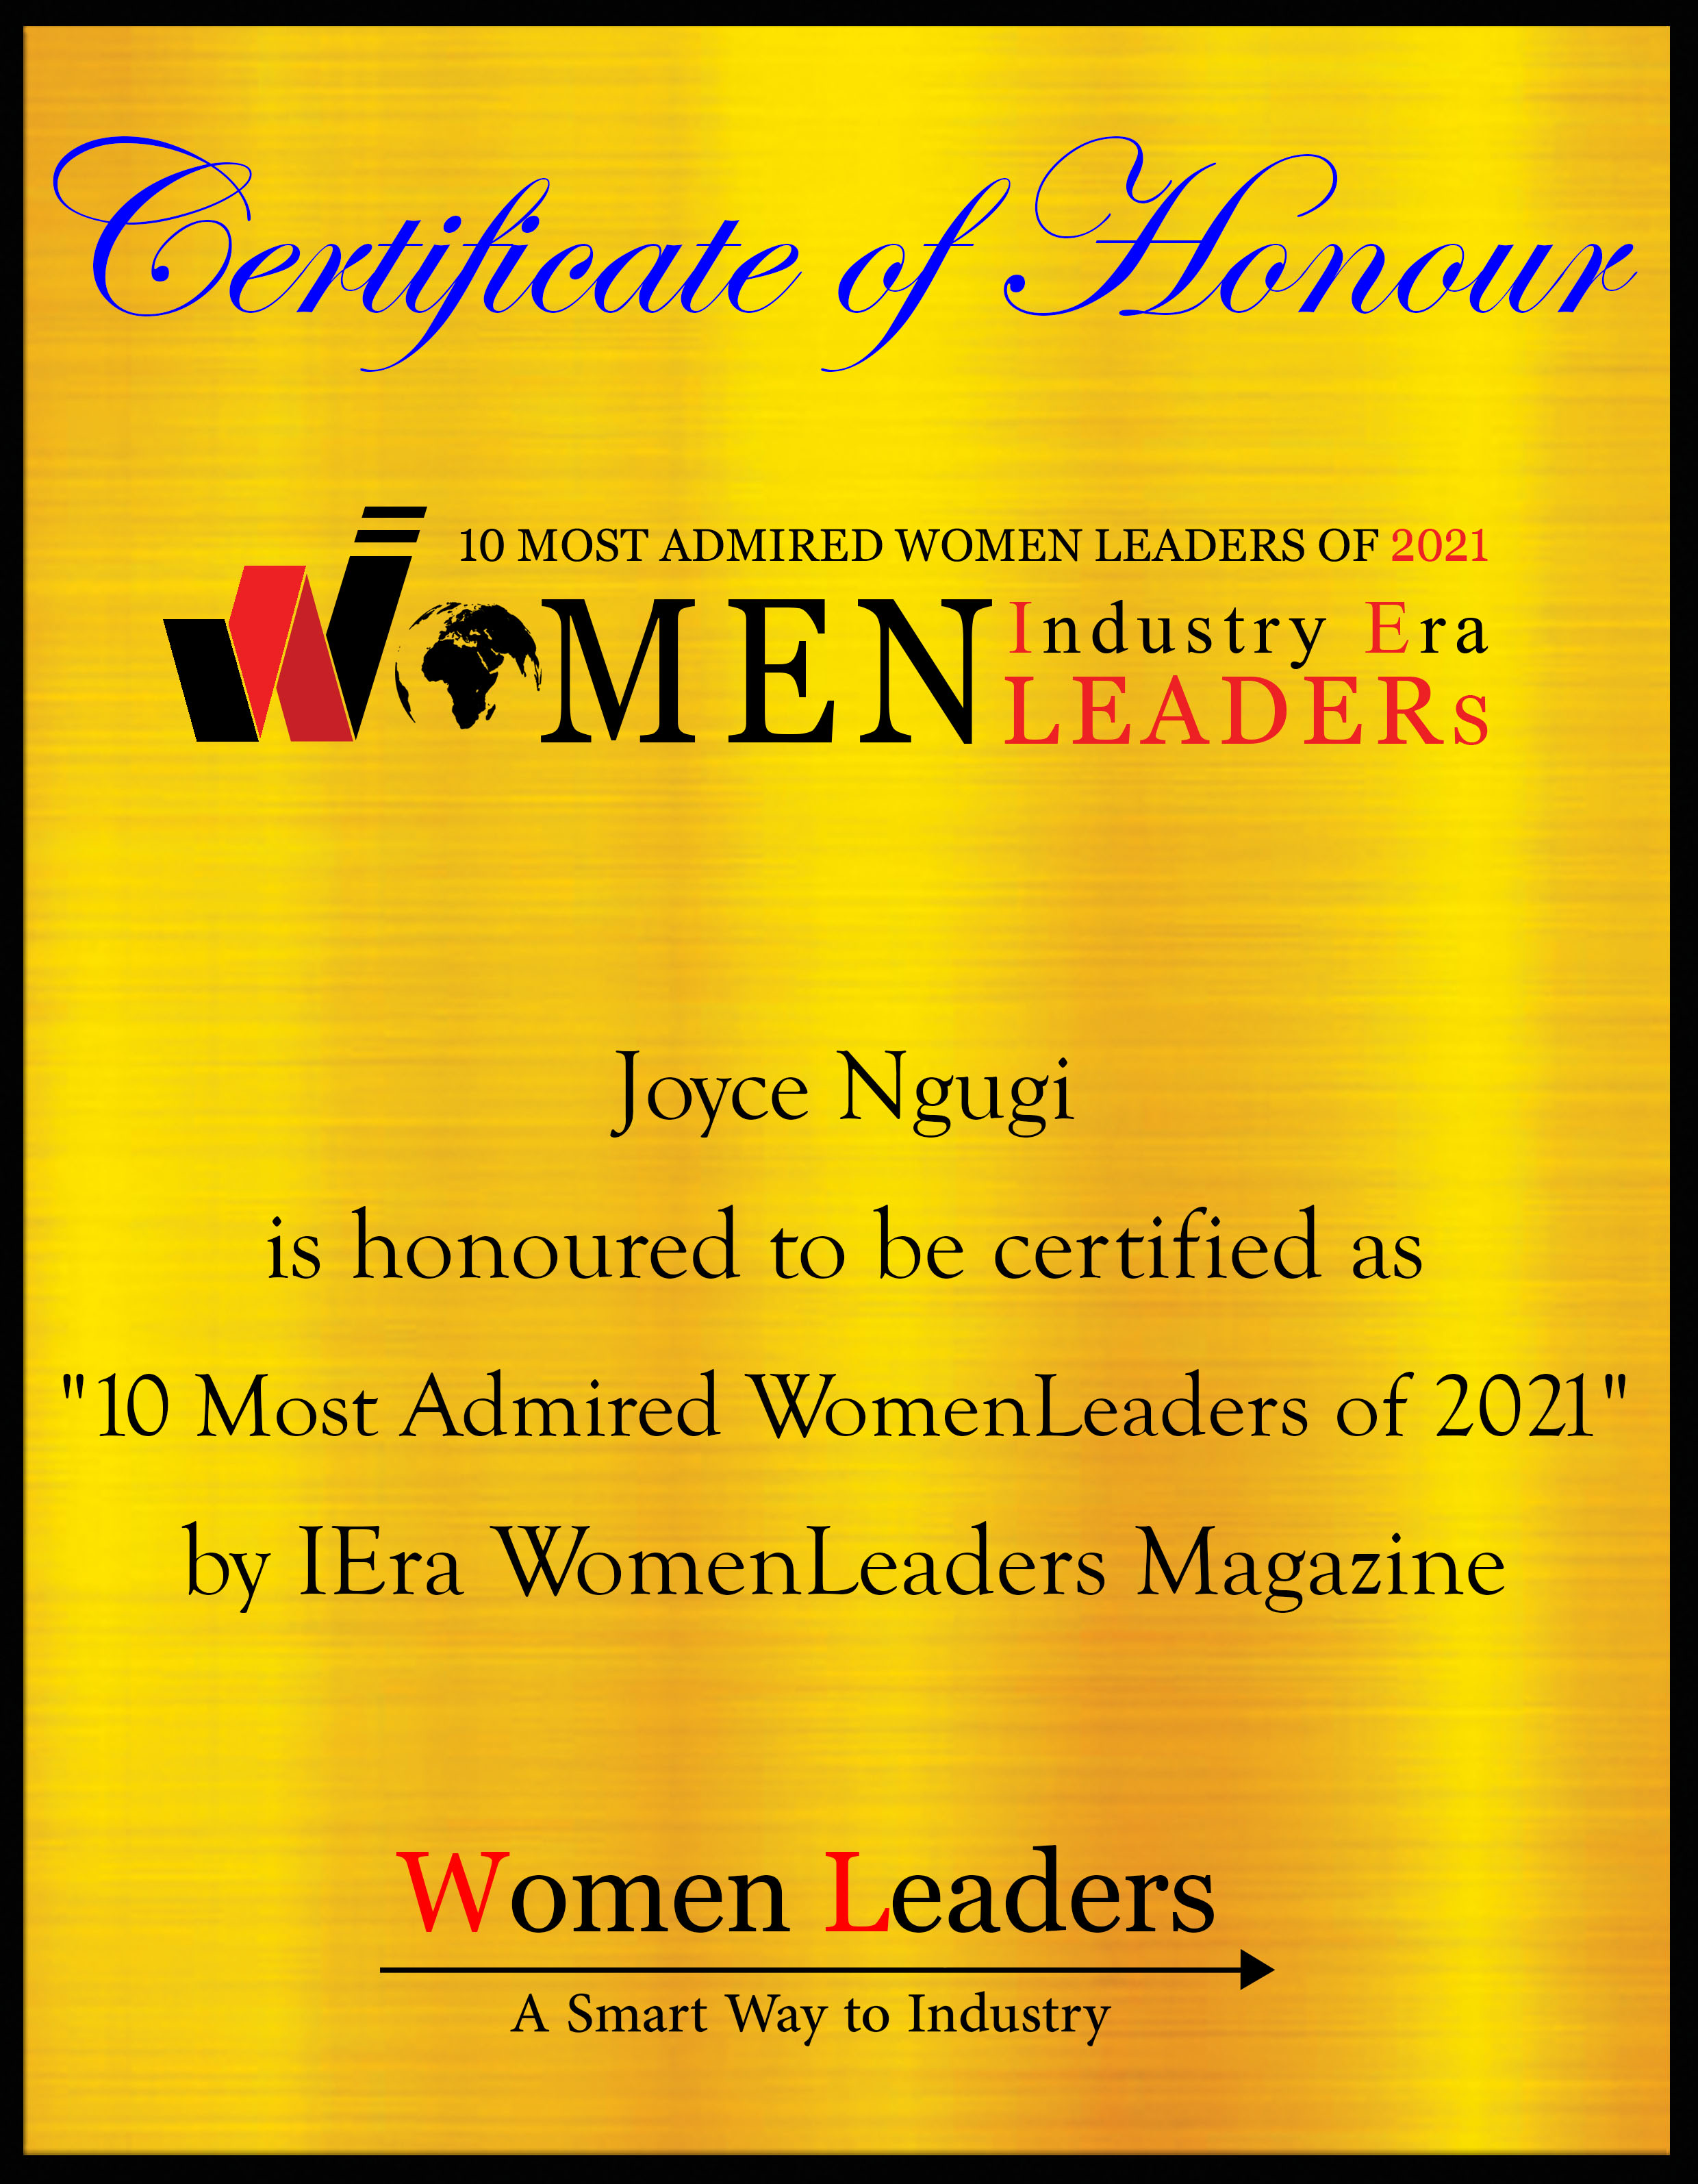 Joyce Ngugi, Director of Finance and Operations – Africa at The Nature Conservancy, Most Admired WomenLeaders of 2021